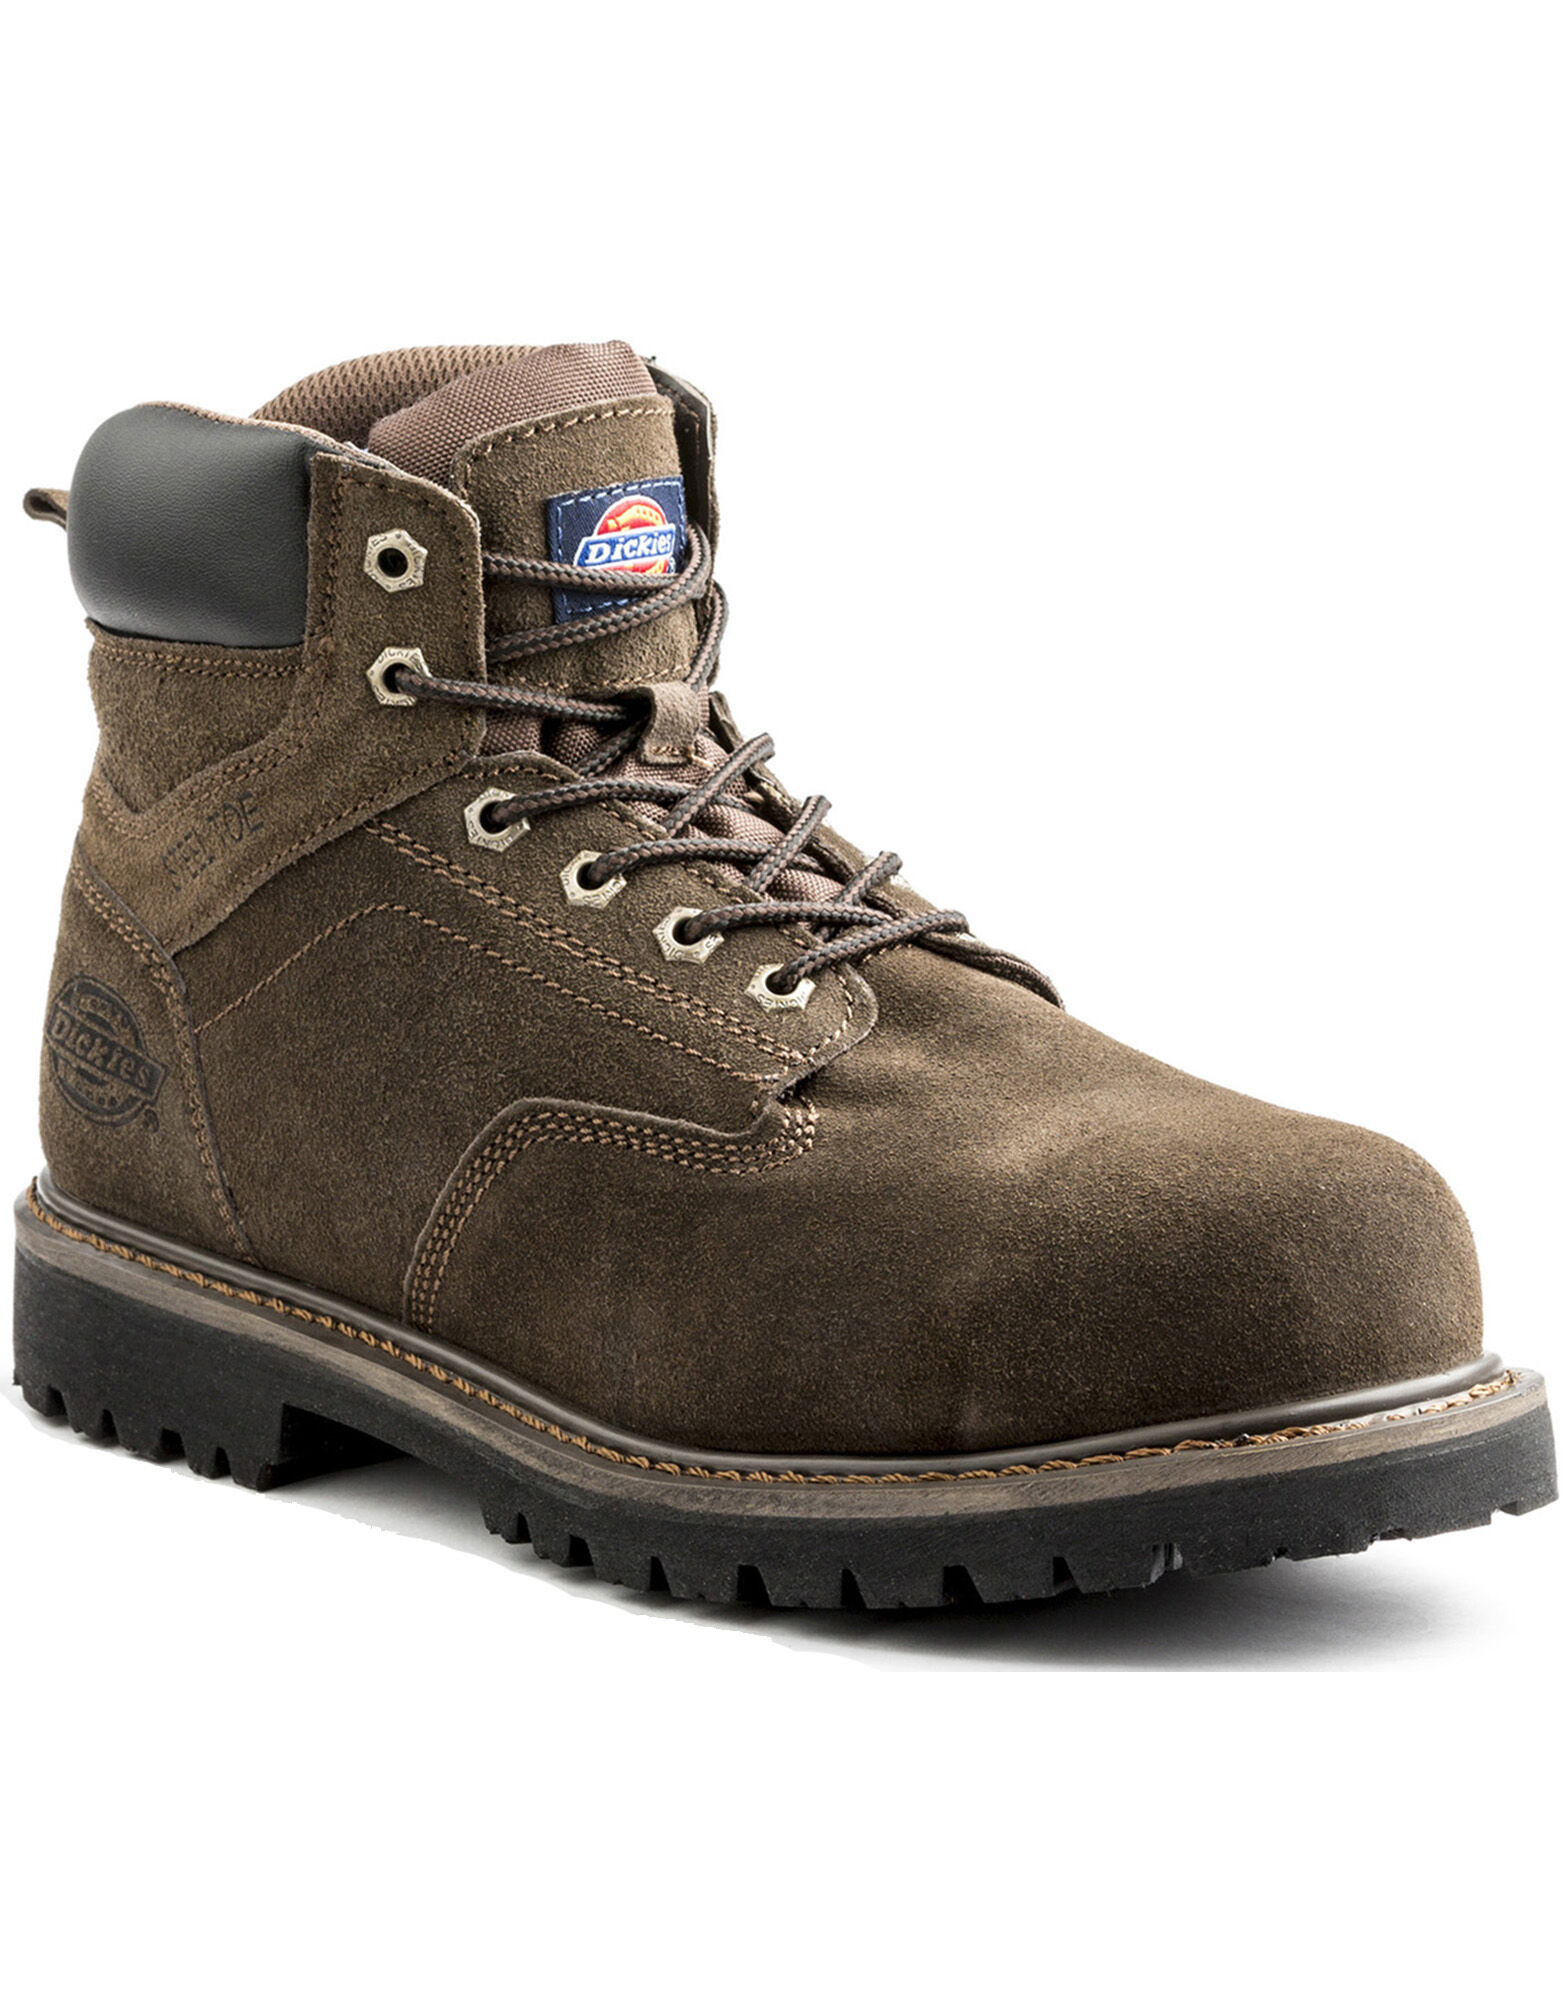 dickies medway safety boots screwfix